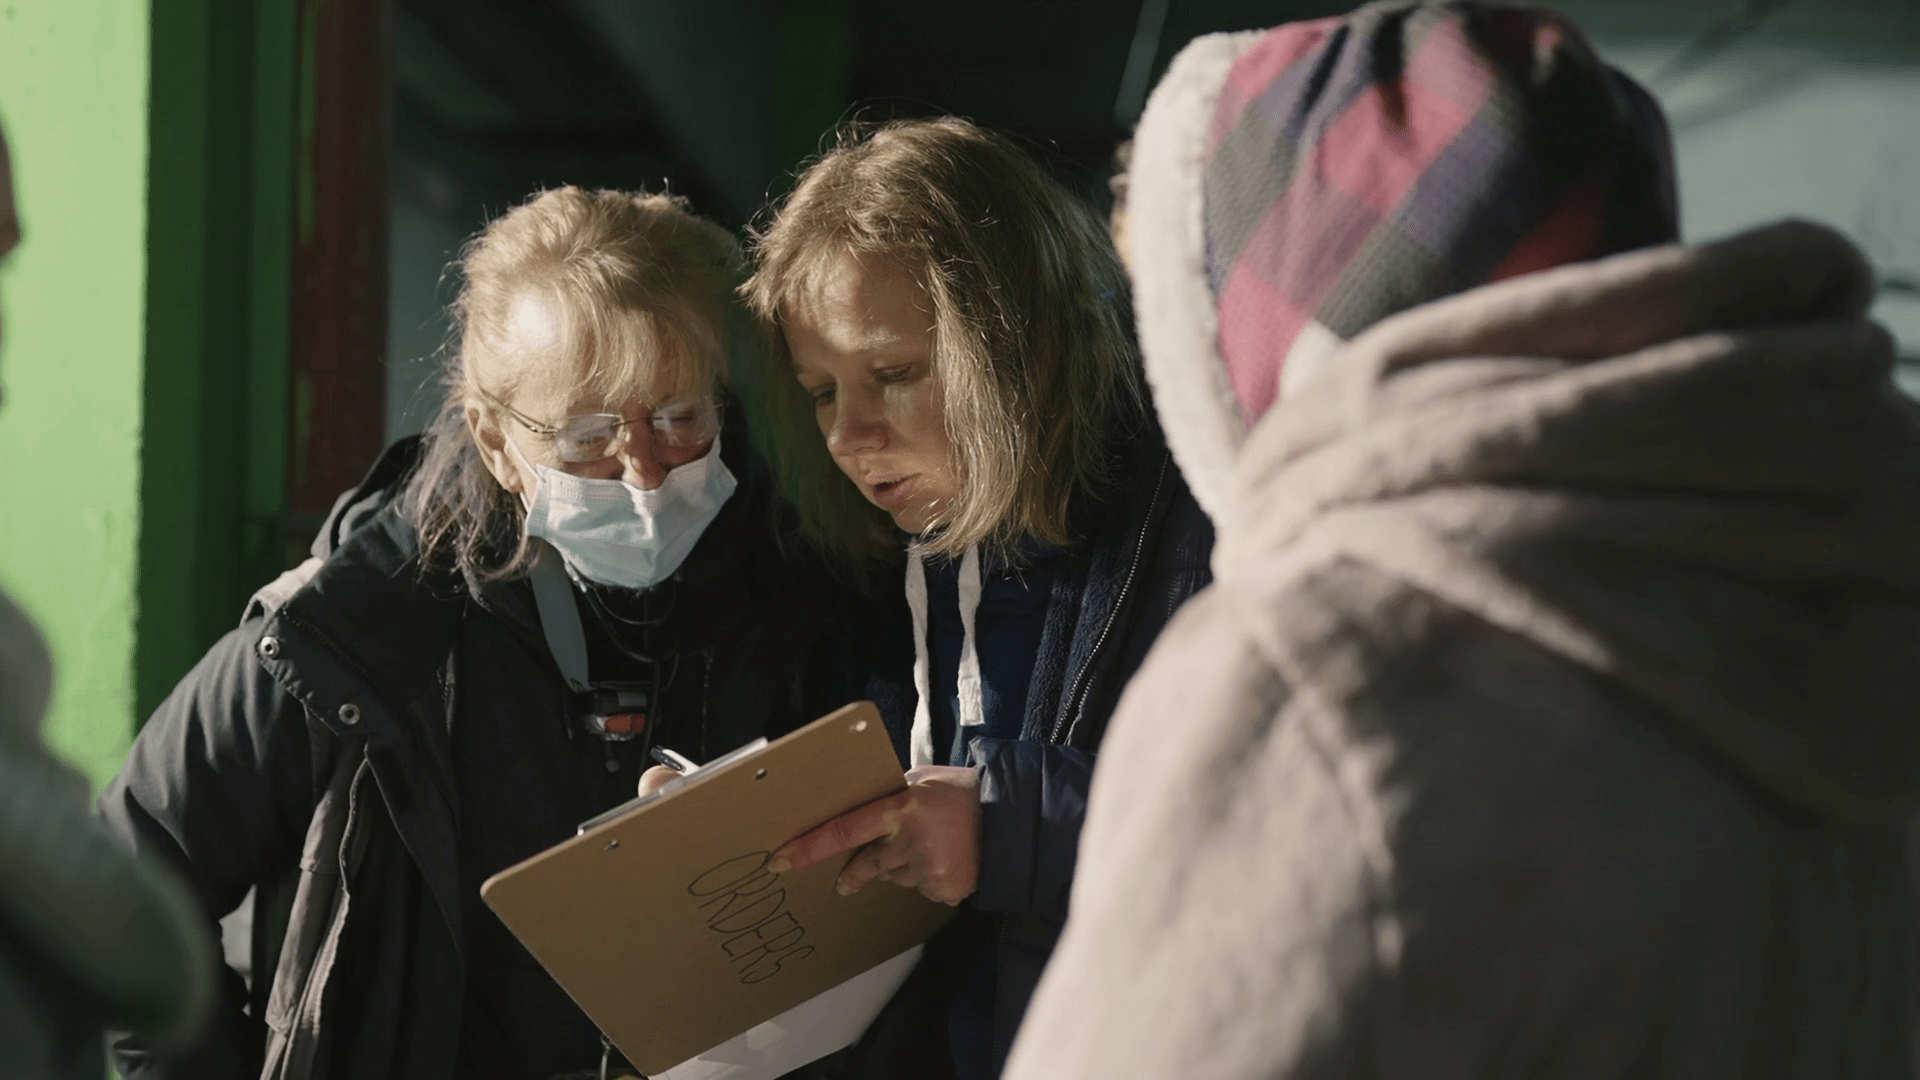 The Samaritan’s Purse Emergency Field Hospital is open in western Ukraine, and their medical team is already treating patients suffering.